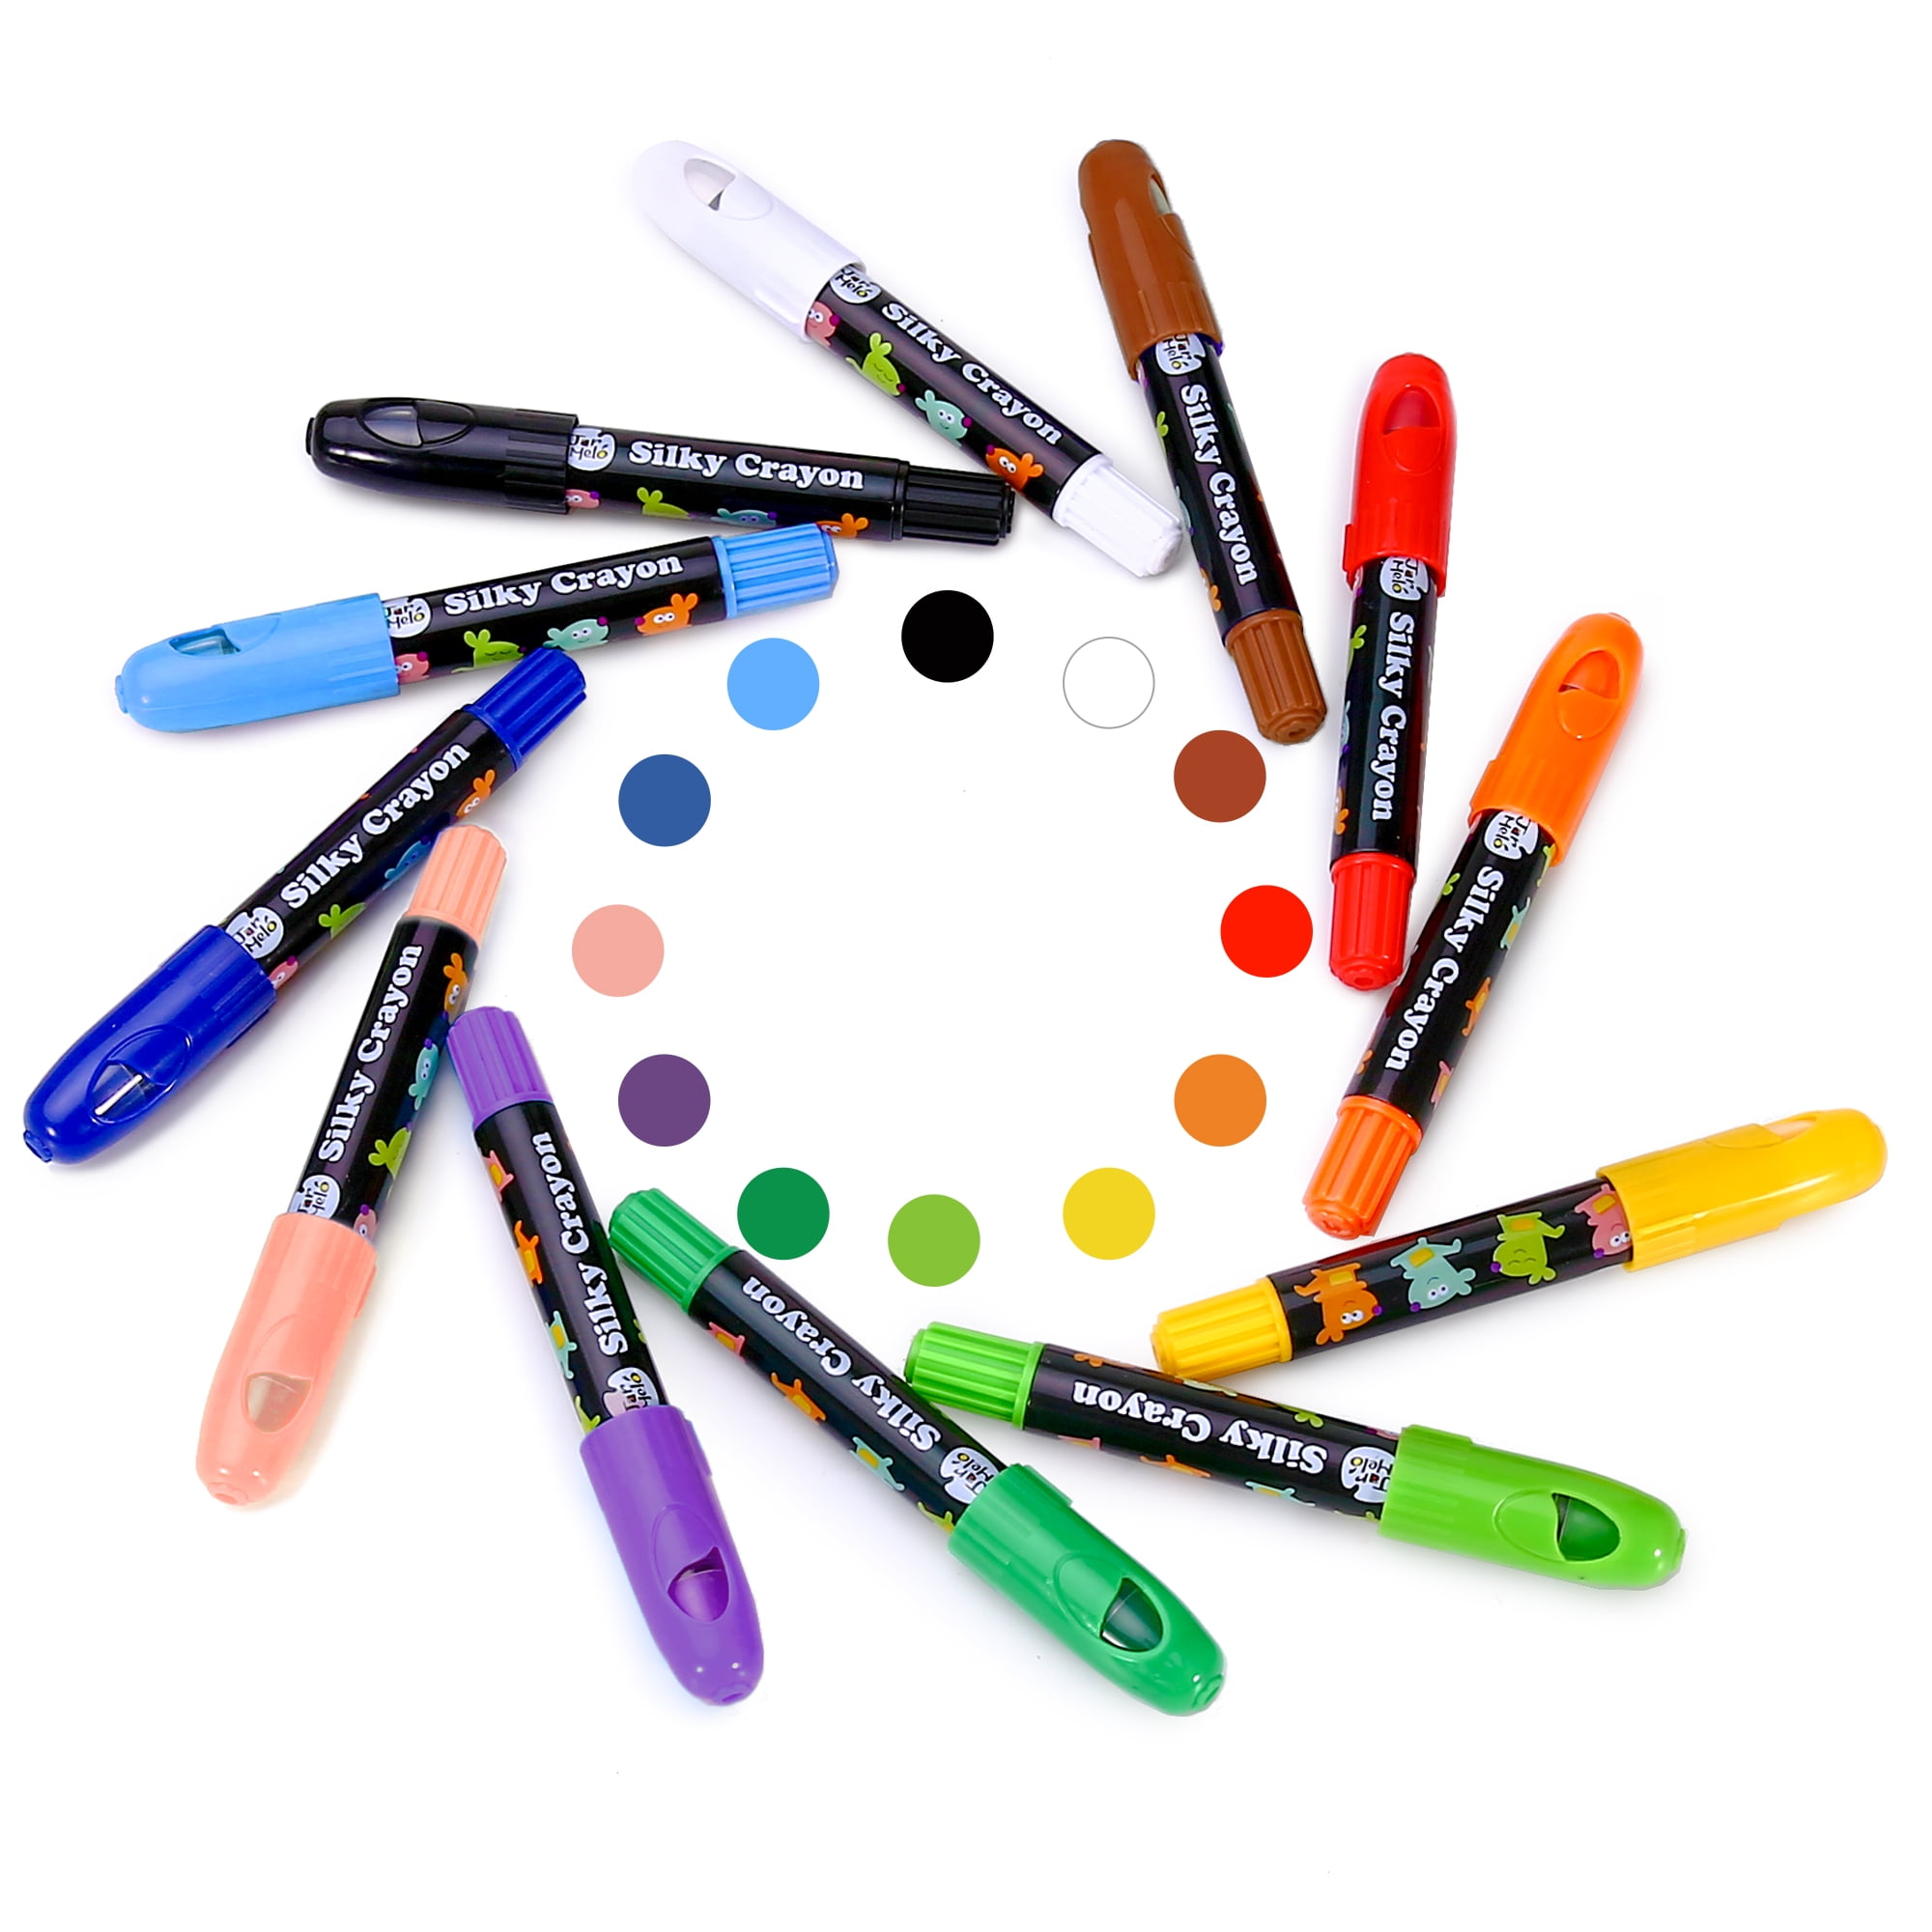 mideer Pease Crayons,12 Colors Washable Toddler Crayons,natural Beeswax with No Harmful substance,for Kids Ages 3+,Safe & Non-Toxic,Coloring Art